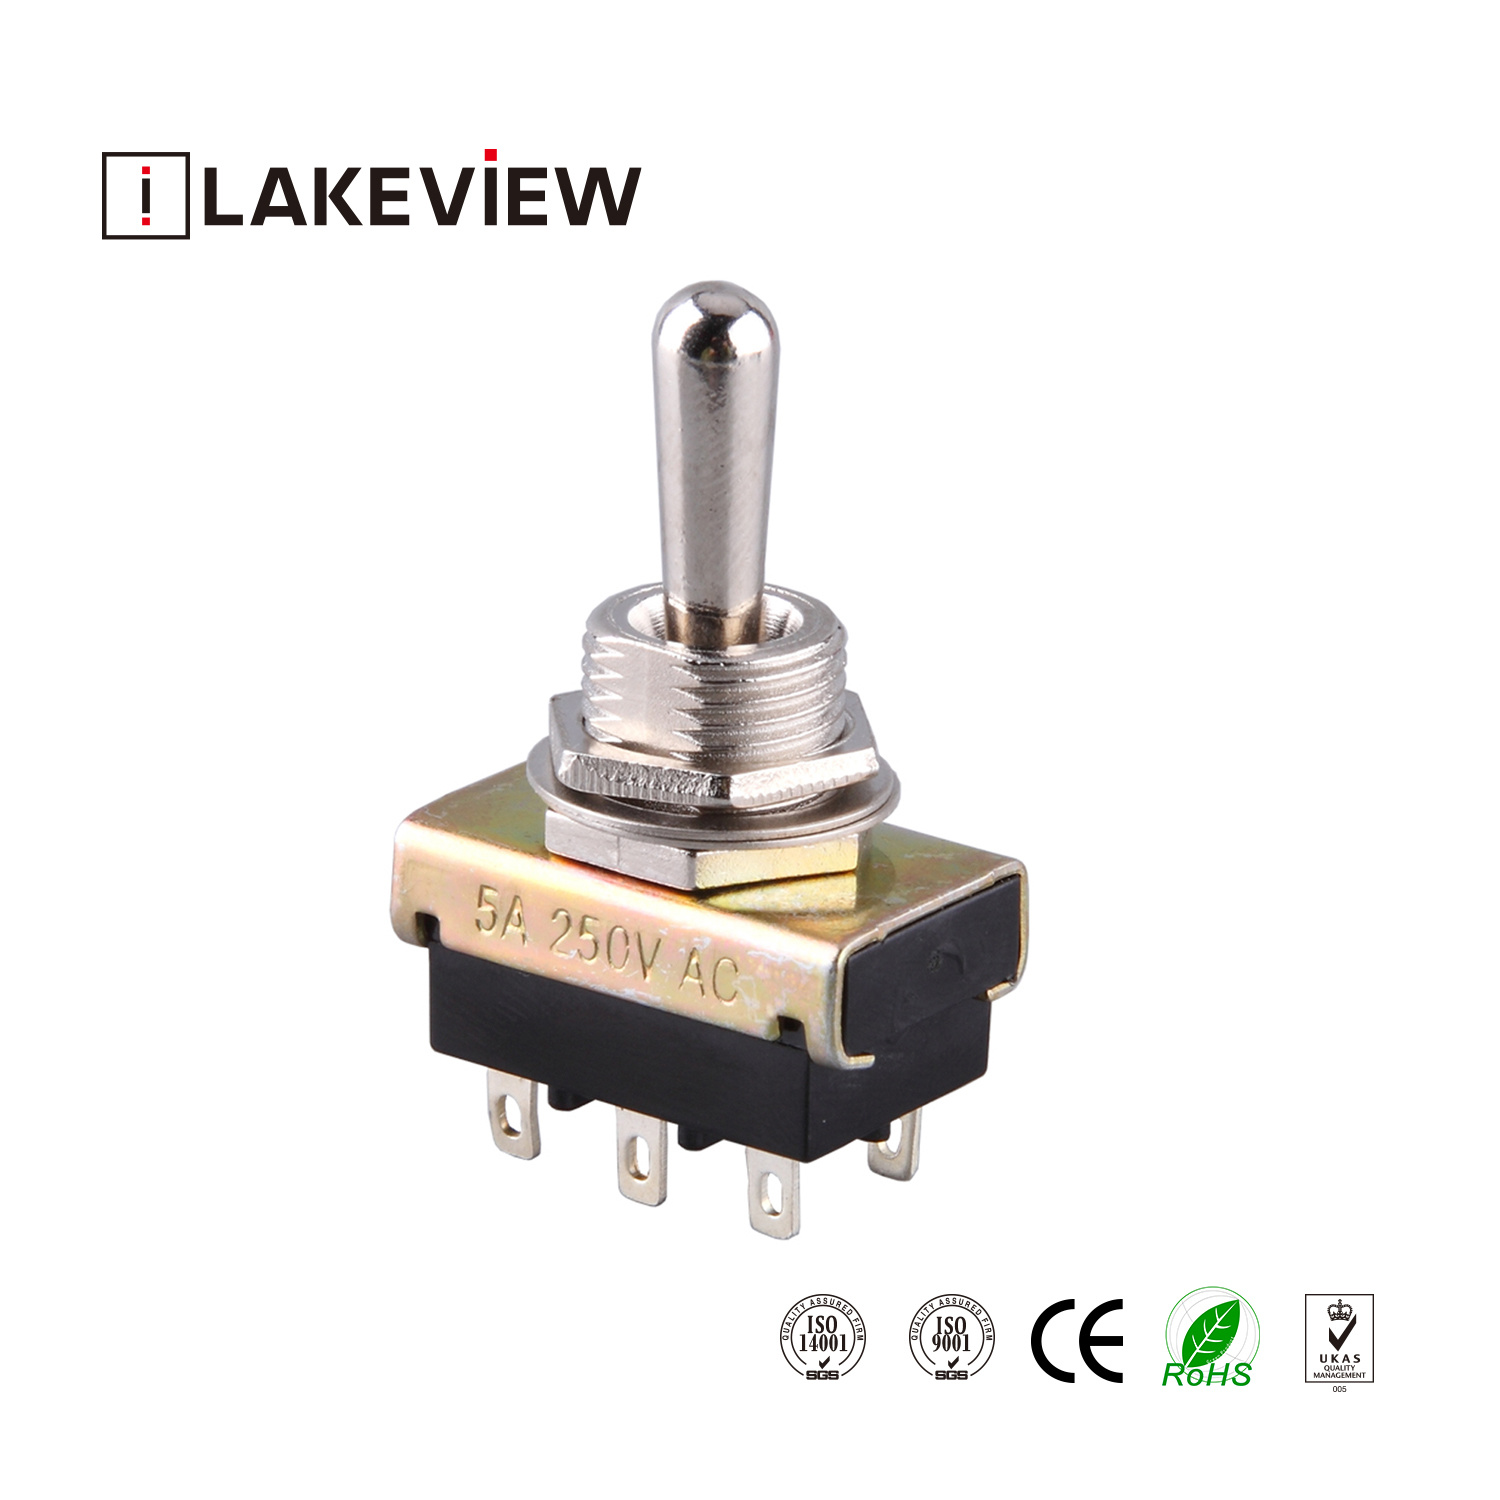 Kn3 SGS Metal Toggle 6 Pins Way Switch Used in Power Tooling Machine